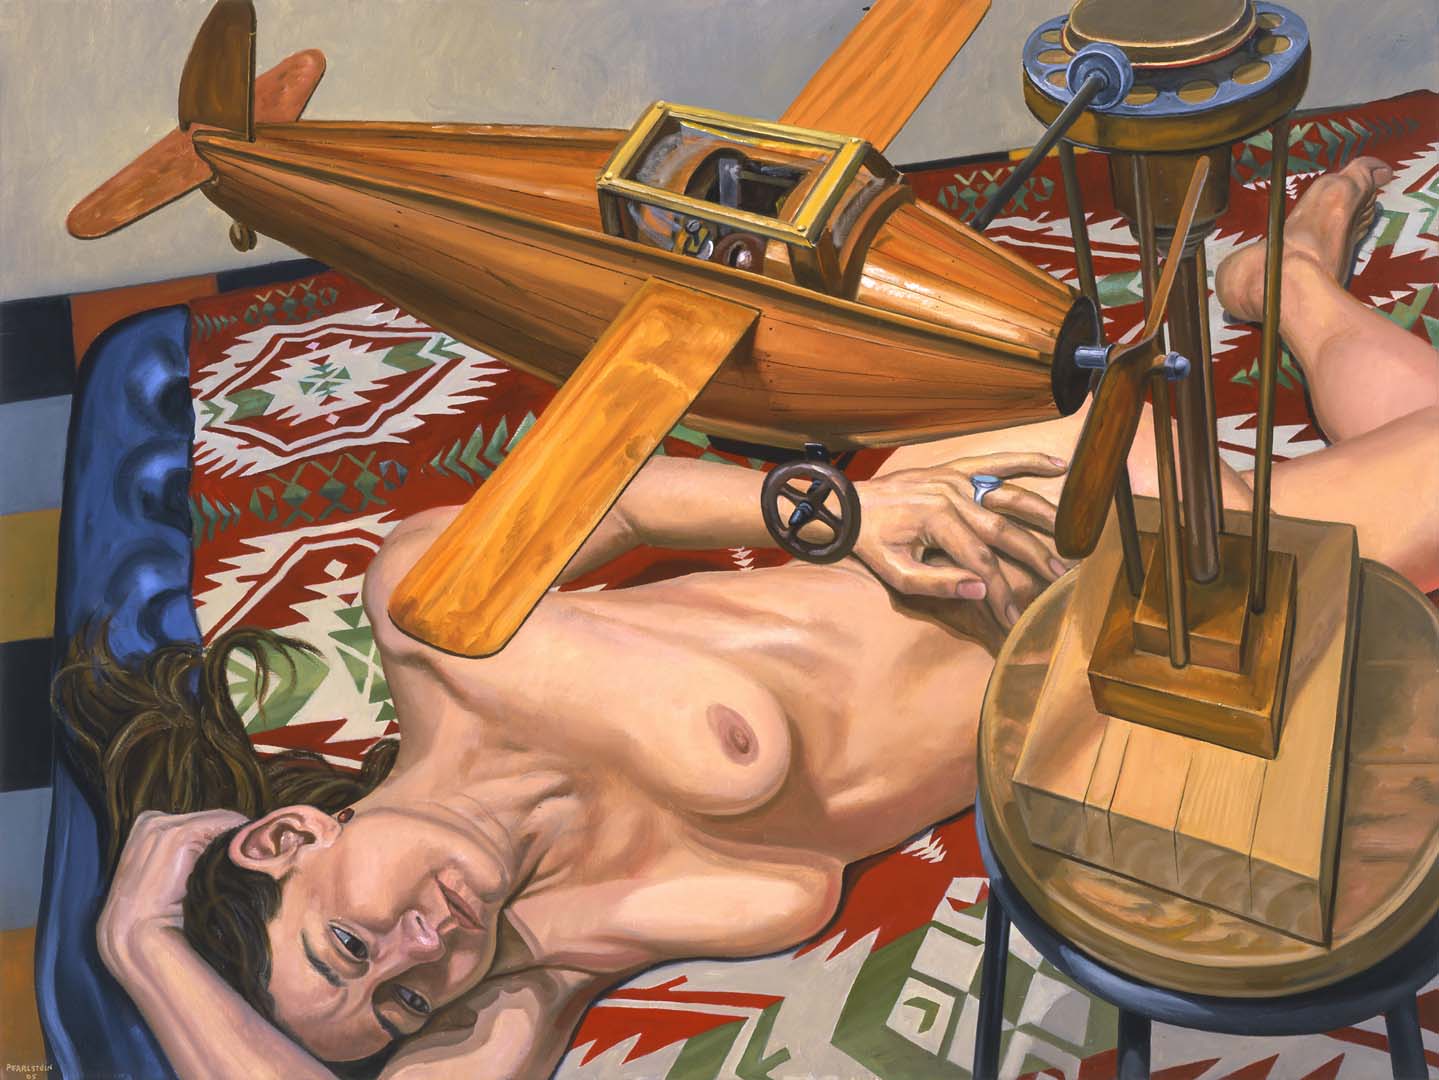 2005 Model with Wooden Airplane Oil on Canvas 36 x 48